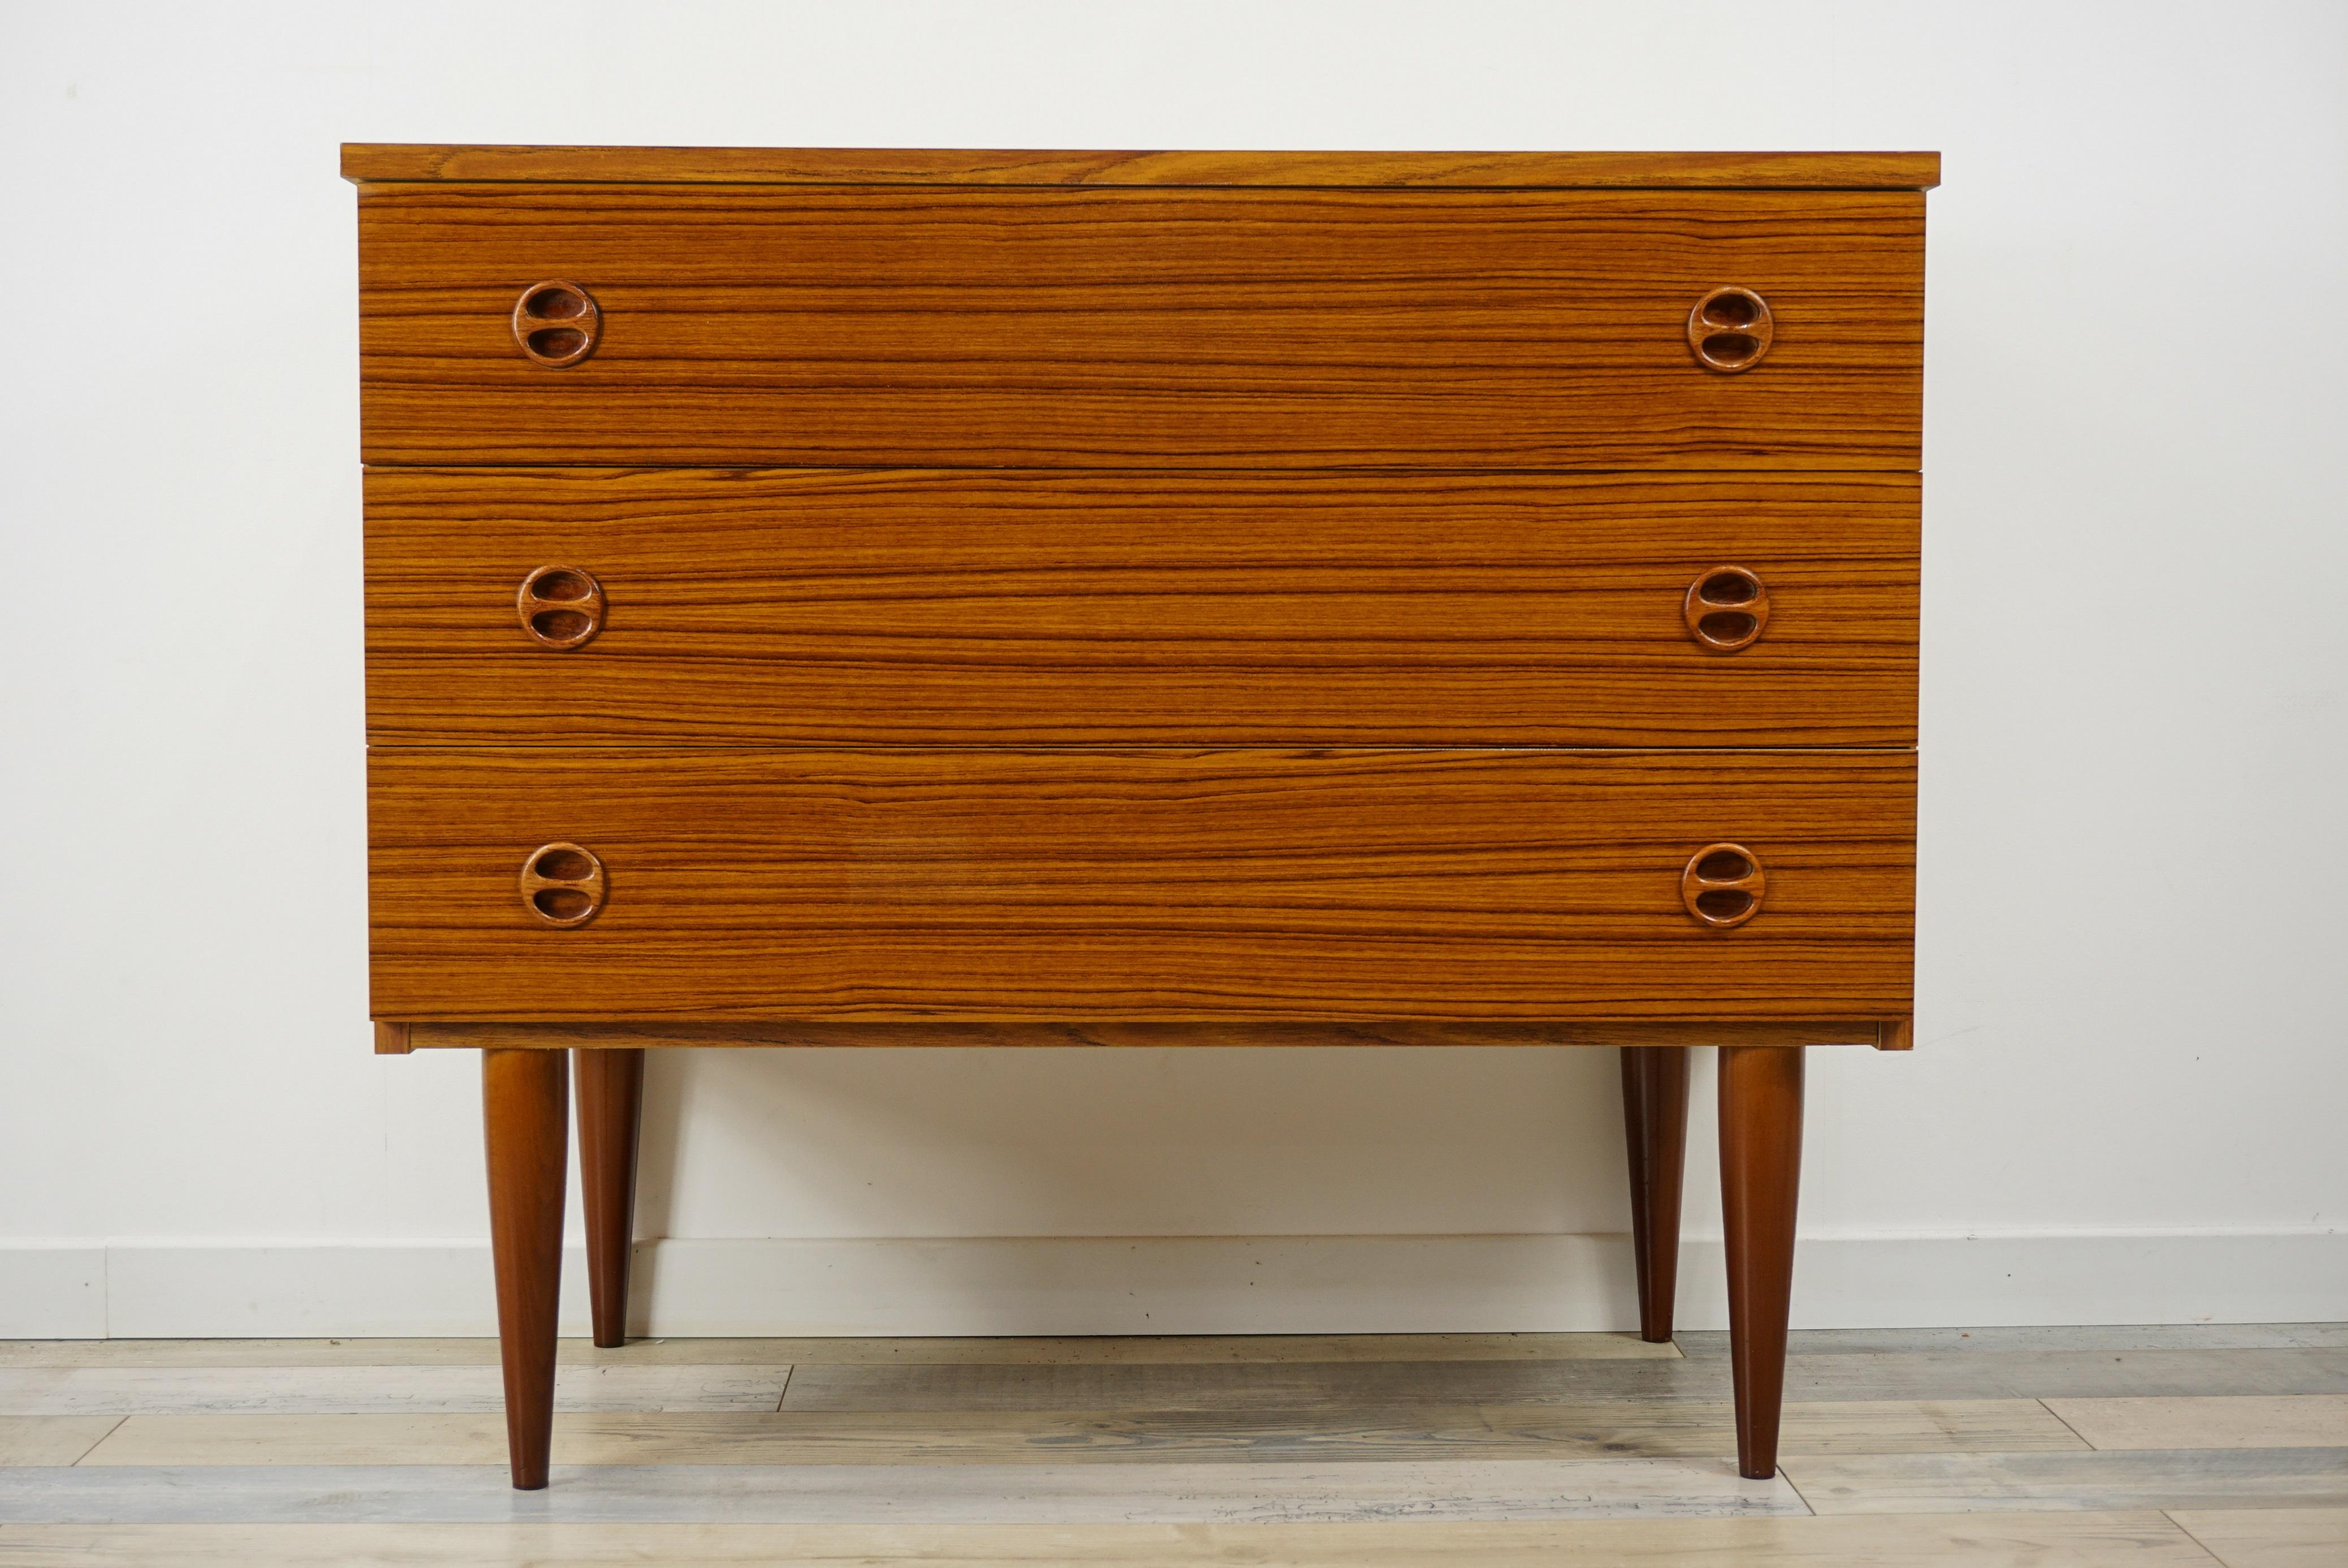 1960s teak wooden chest of drawers composed of three drawers with sculpted wooden handles. In excellent state.